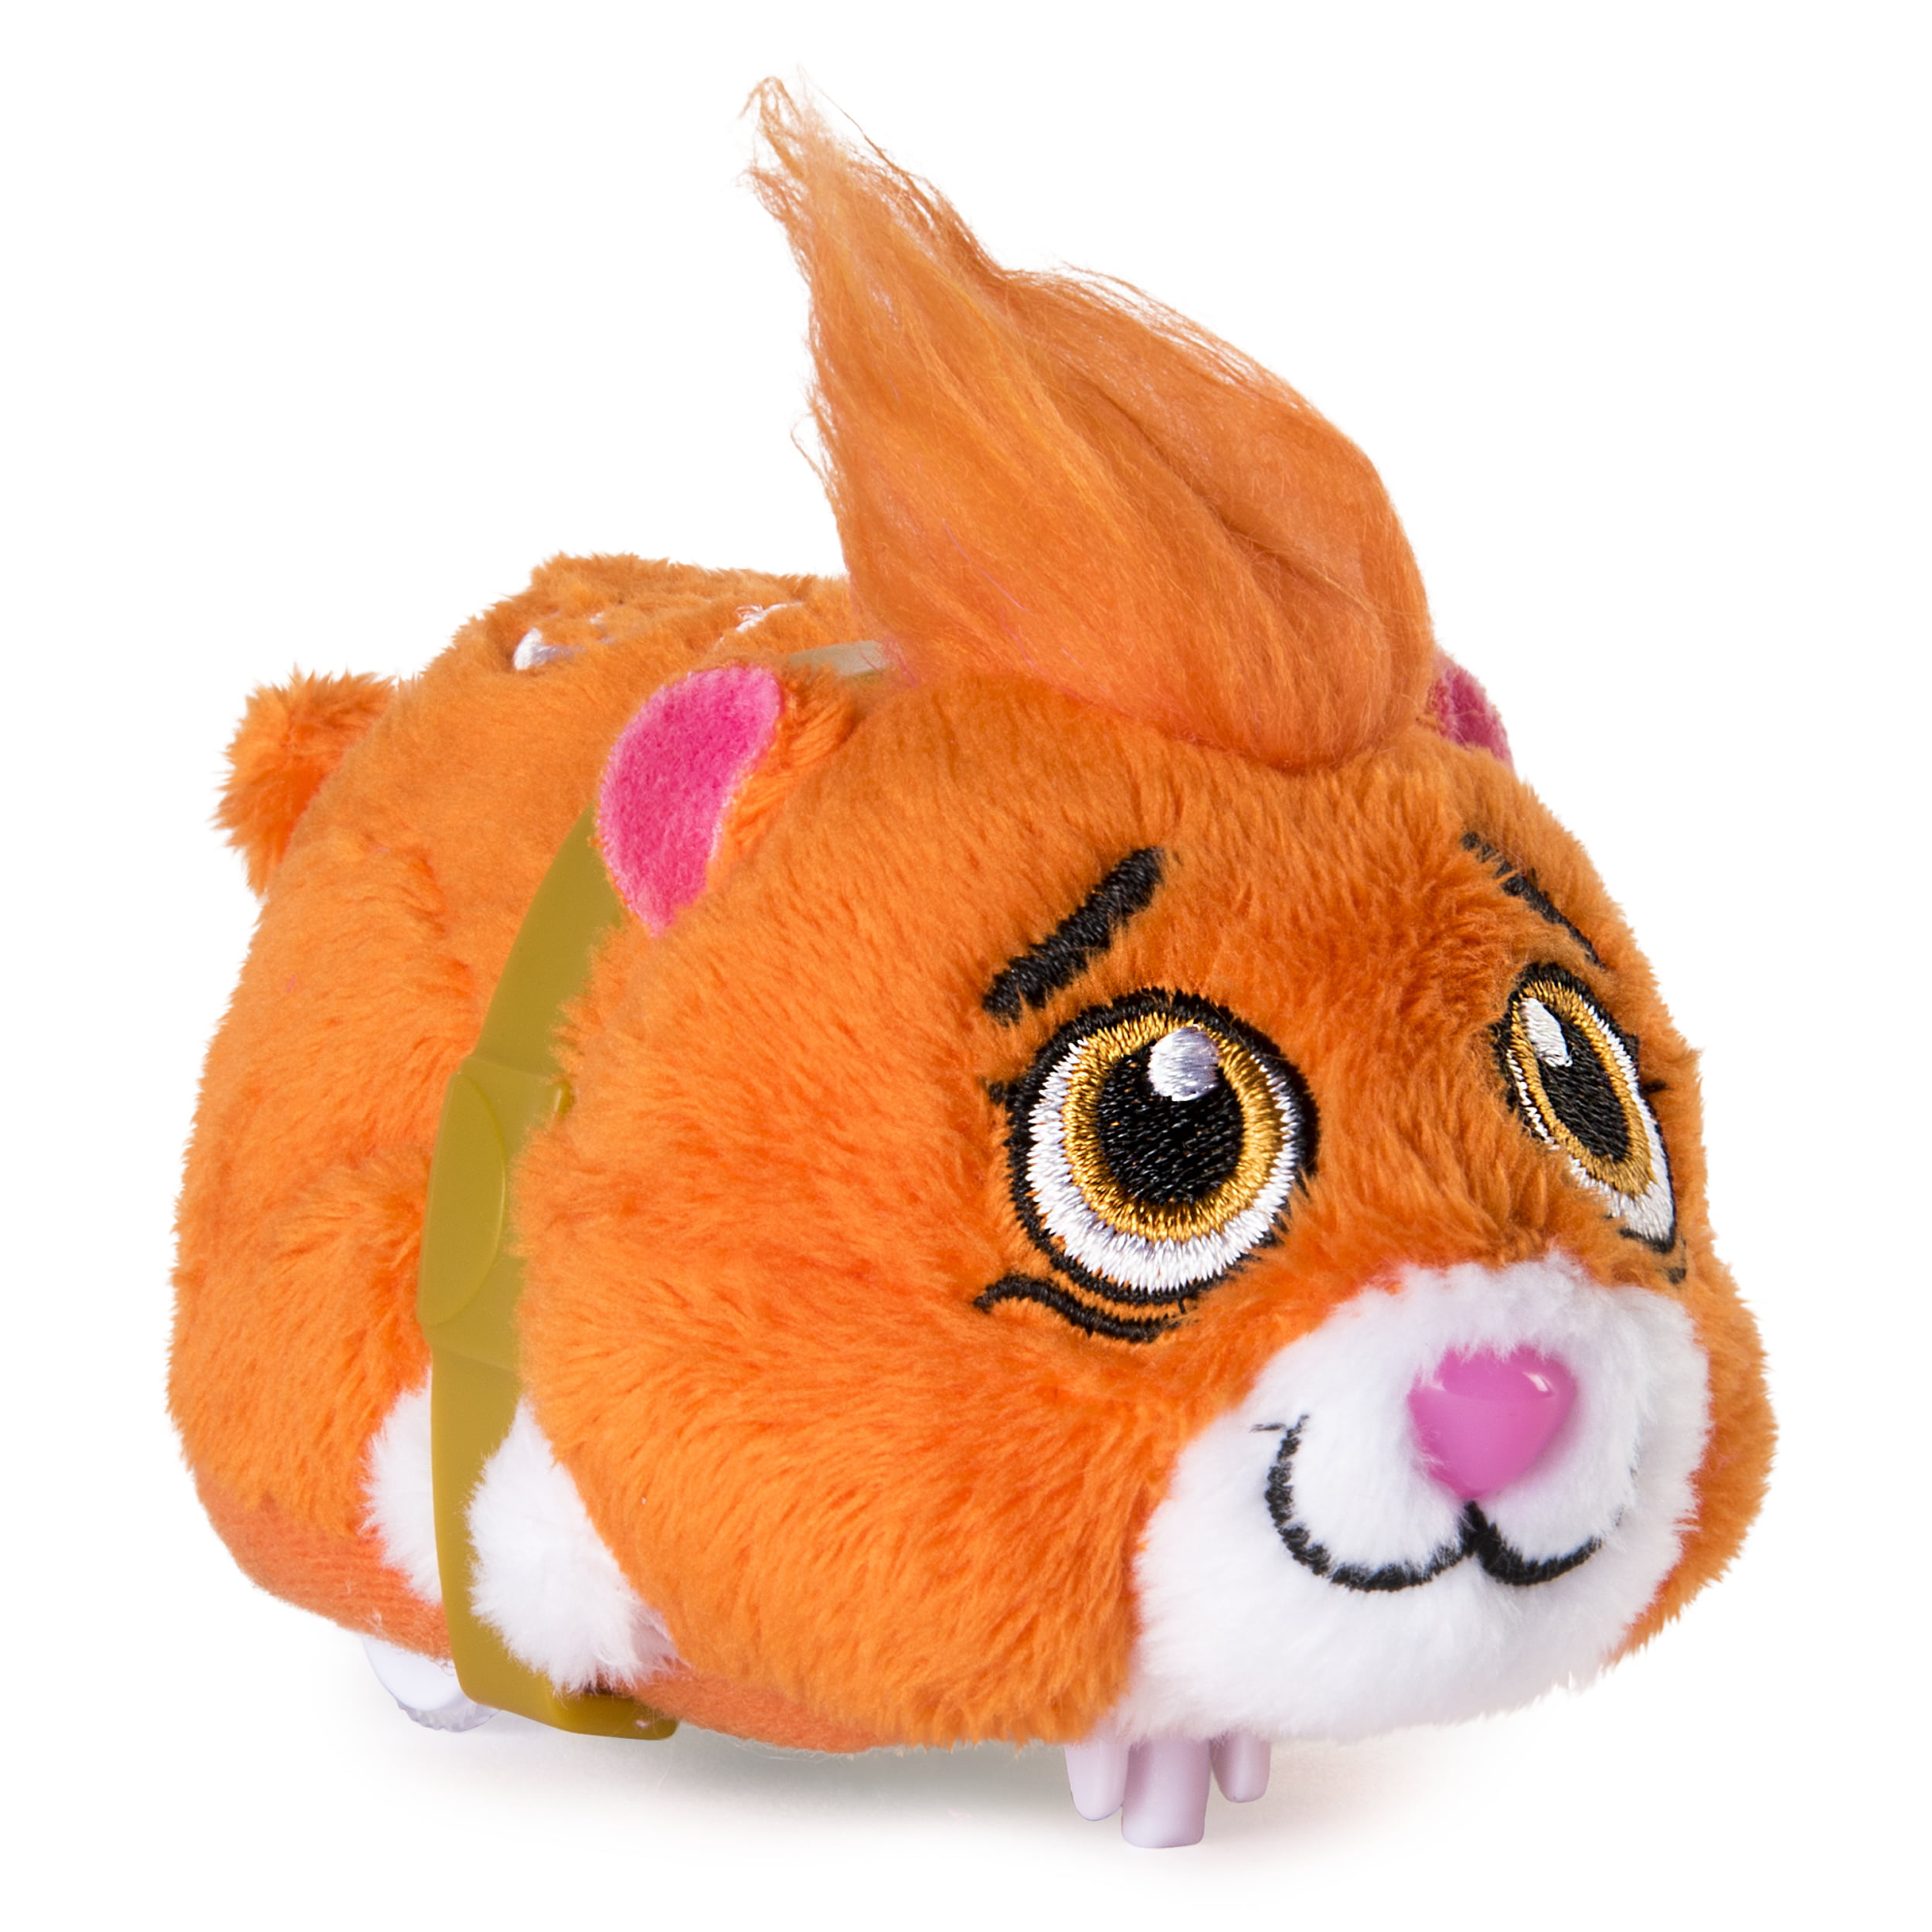 Furry 4” Hamster Toy with Sound and Movement Pipsqueak Zhu Zhu Pets 